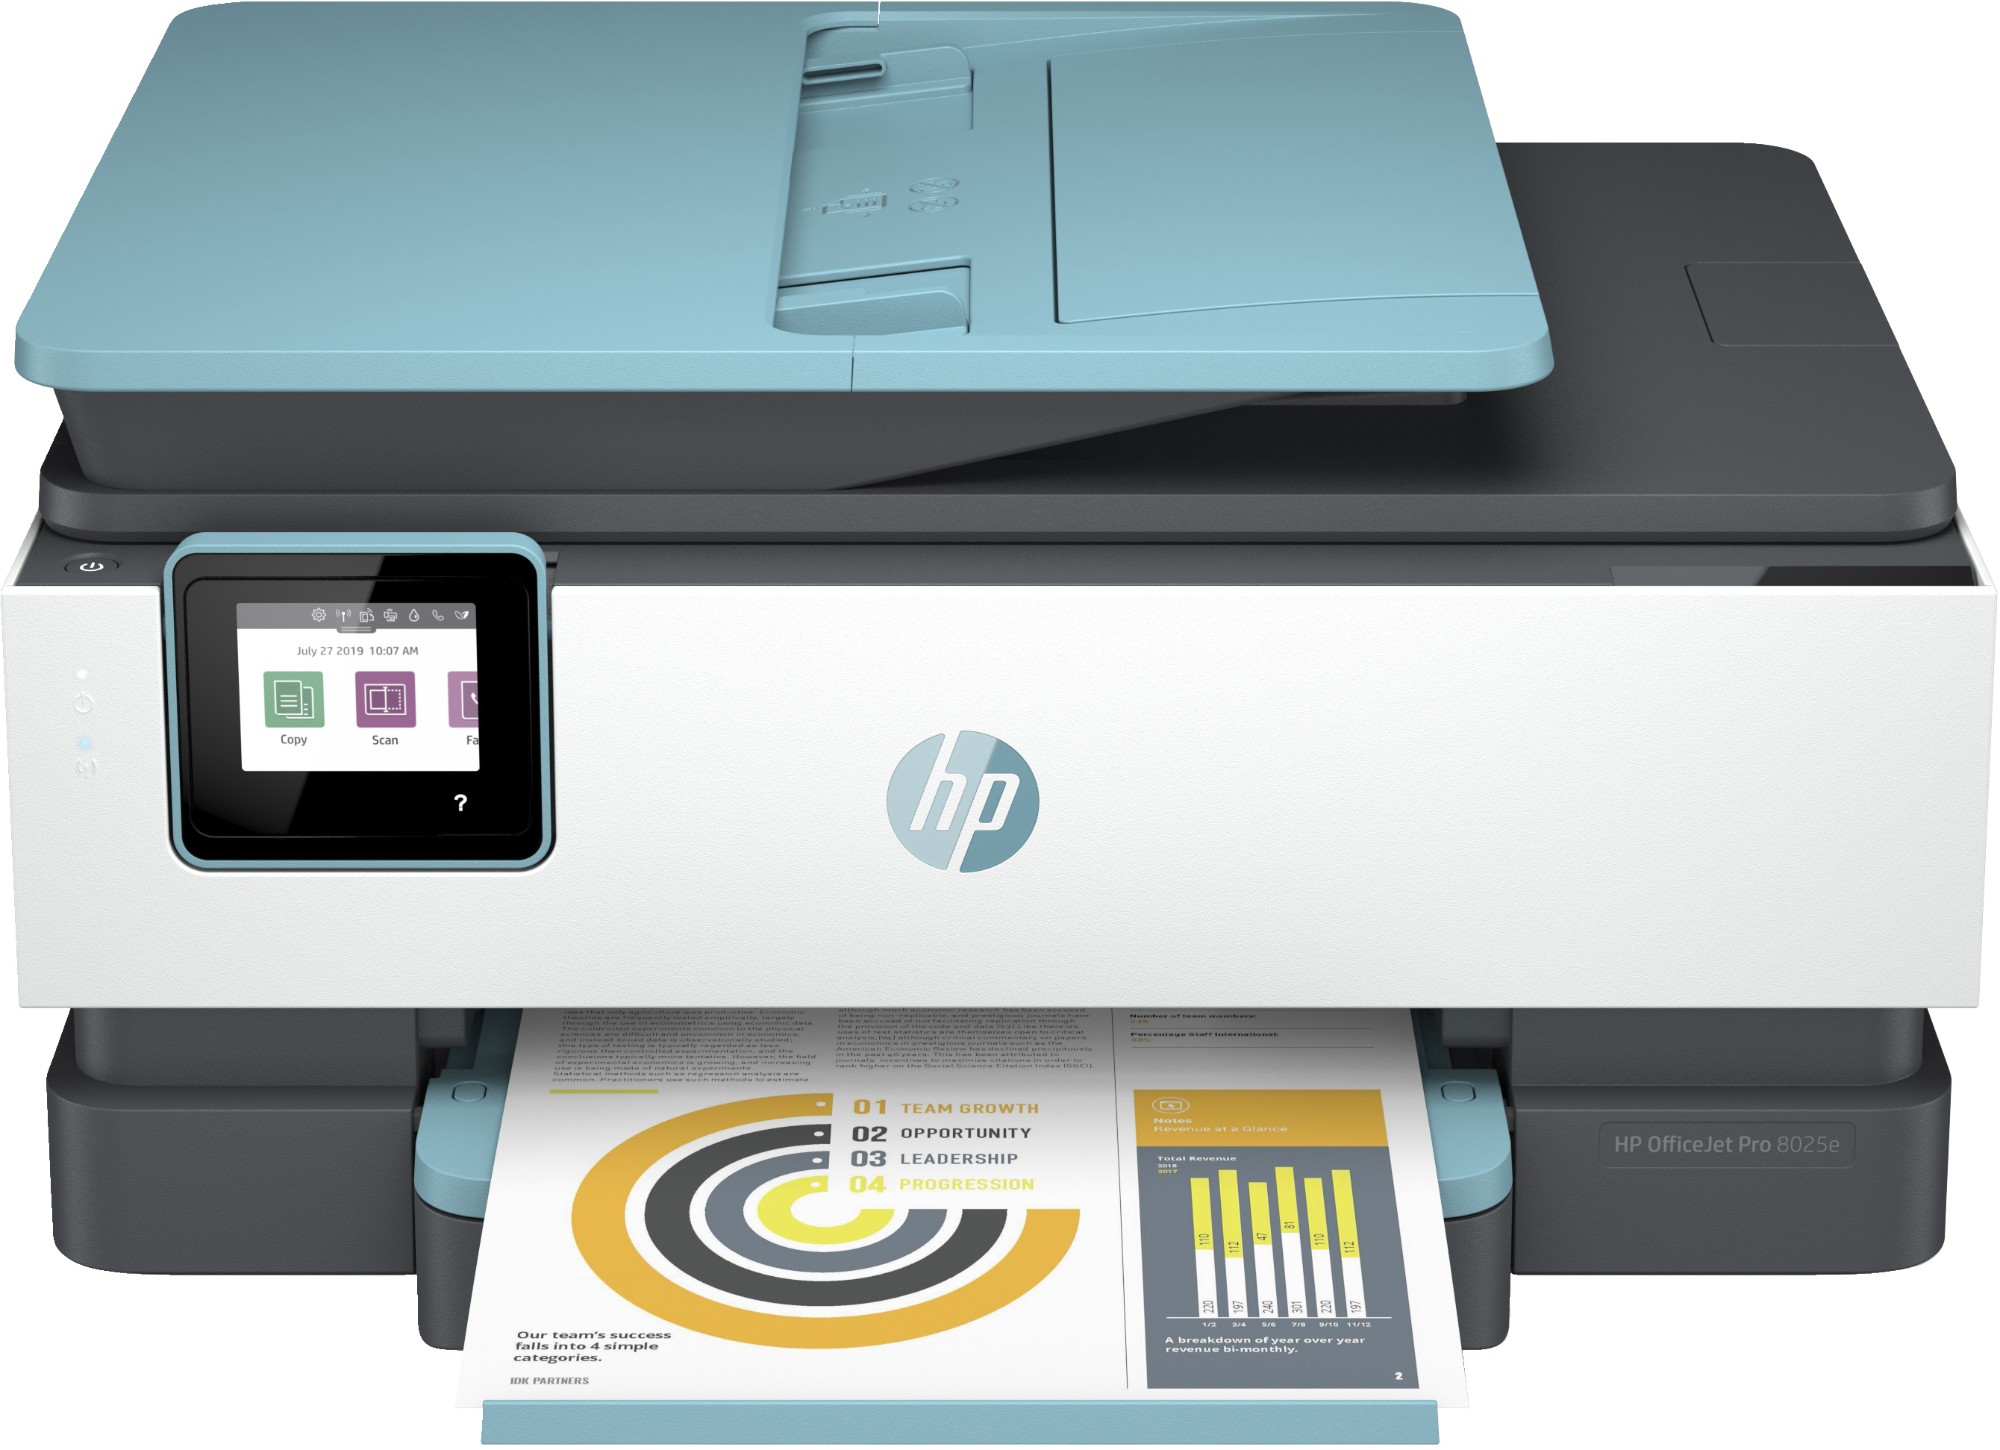 HP OfficeJet Pro HP 8025e All-in-One Printer, Colour, Printer for Home, Print, copy, scan, fax, HP+; HP Instant Ink eligible; Automatic document feeder; Two-sided printing